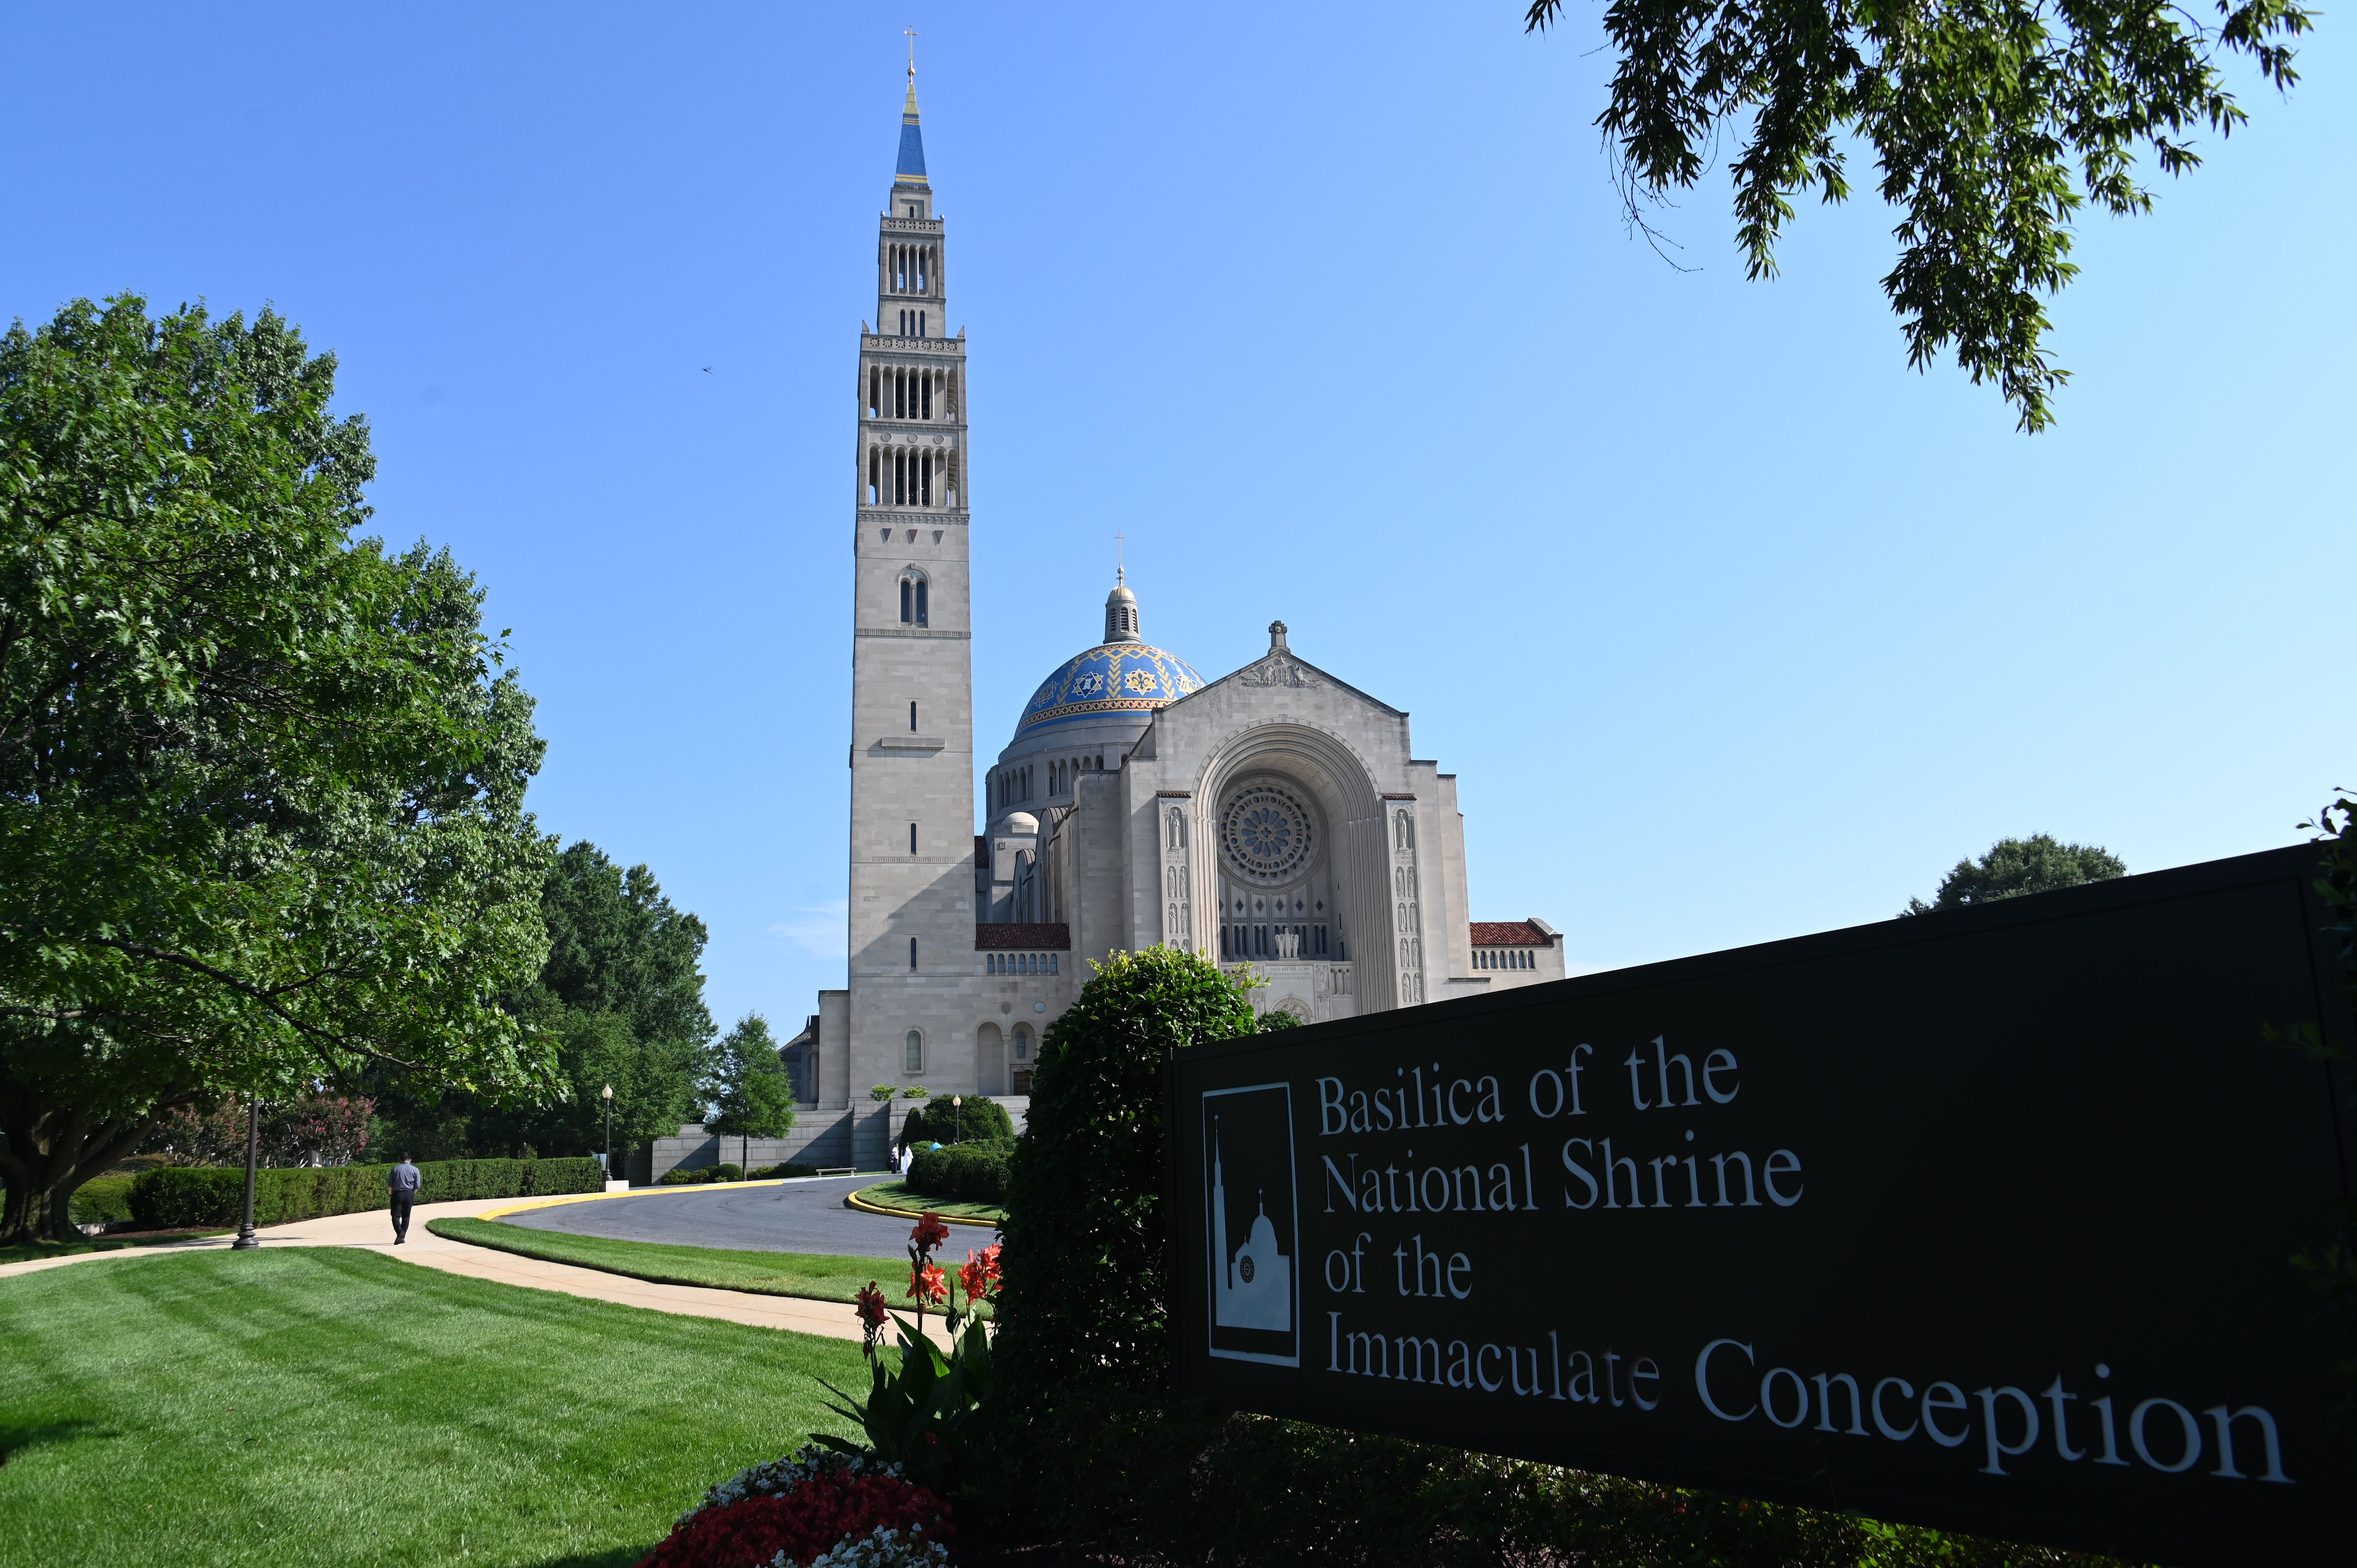 The Basilica of the National Shrine of the Immaculate Conception is viewed on July 21, 2019 in Washington,DC. - The National shrine is the largest Catholic church in the United States and in North America, and the tallest habitable building in Washington, D.C. (Photo by Daniel SLIM / AFP) (Photo credit should read DANIEL SLIM/AFP via Getty Images)